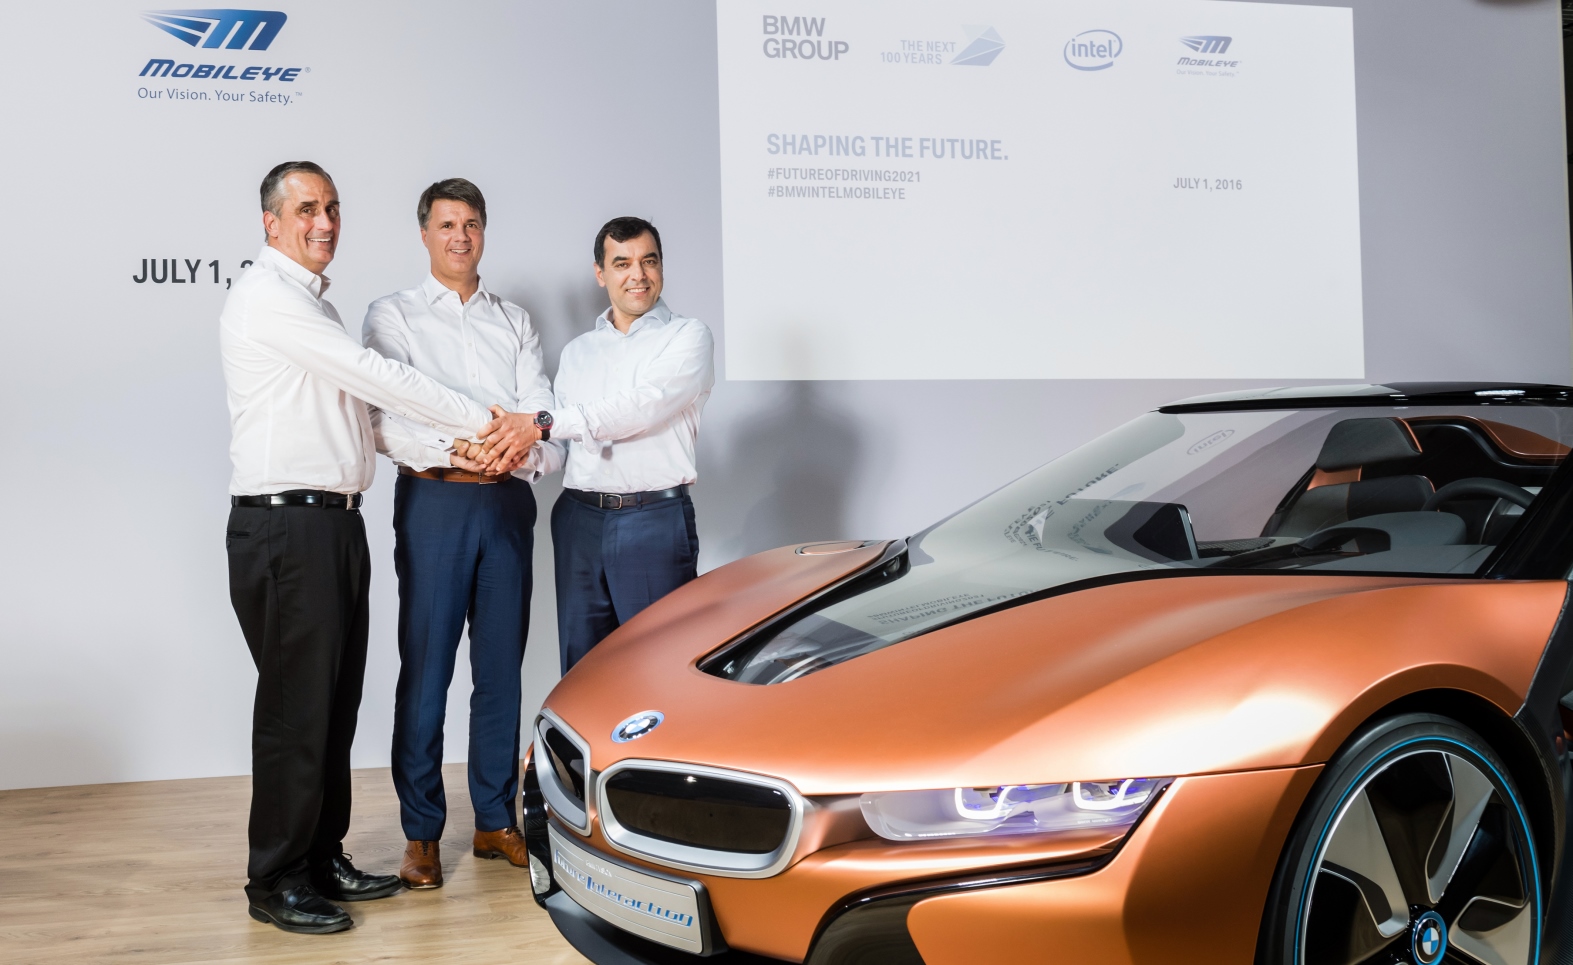 From left, Intel CEO Brian Krzanich, Chairman of the Board of Management of BMW AG Harald KrÃ¼ger and Mobileye Cofounder, Chairman and CTO Prof. Amnon Shashua at a news conference in Munich where they announced their partnership. Photo courtesy of BMW Group